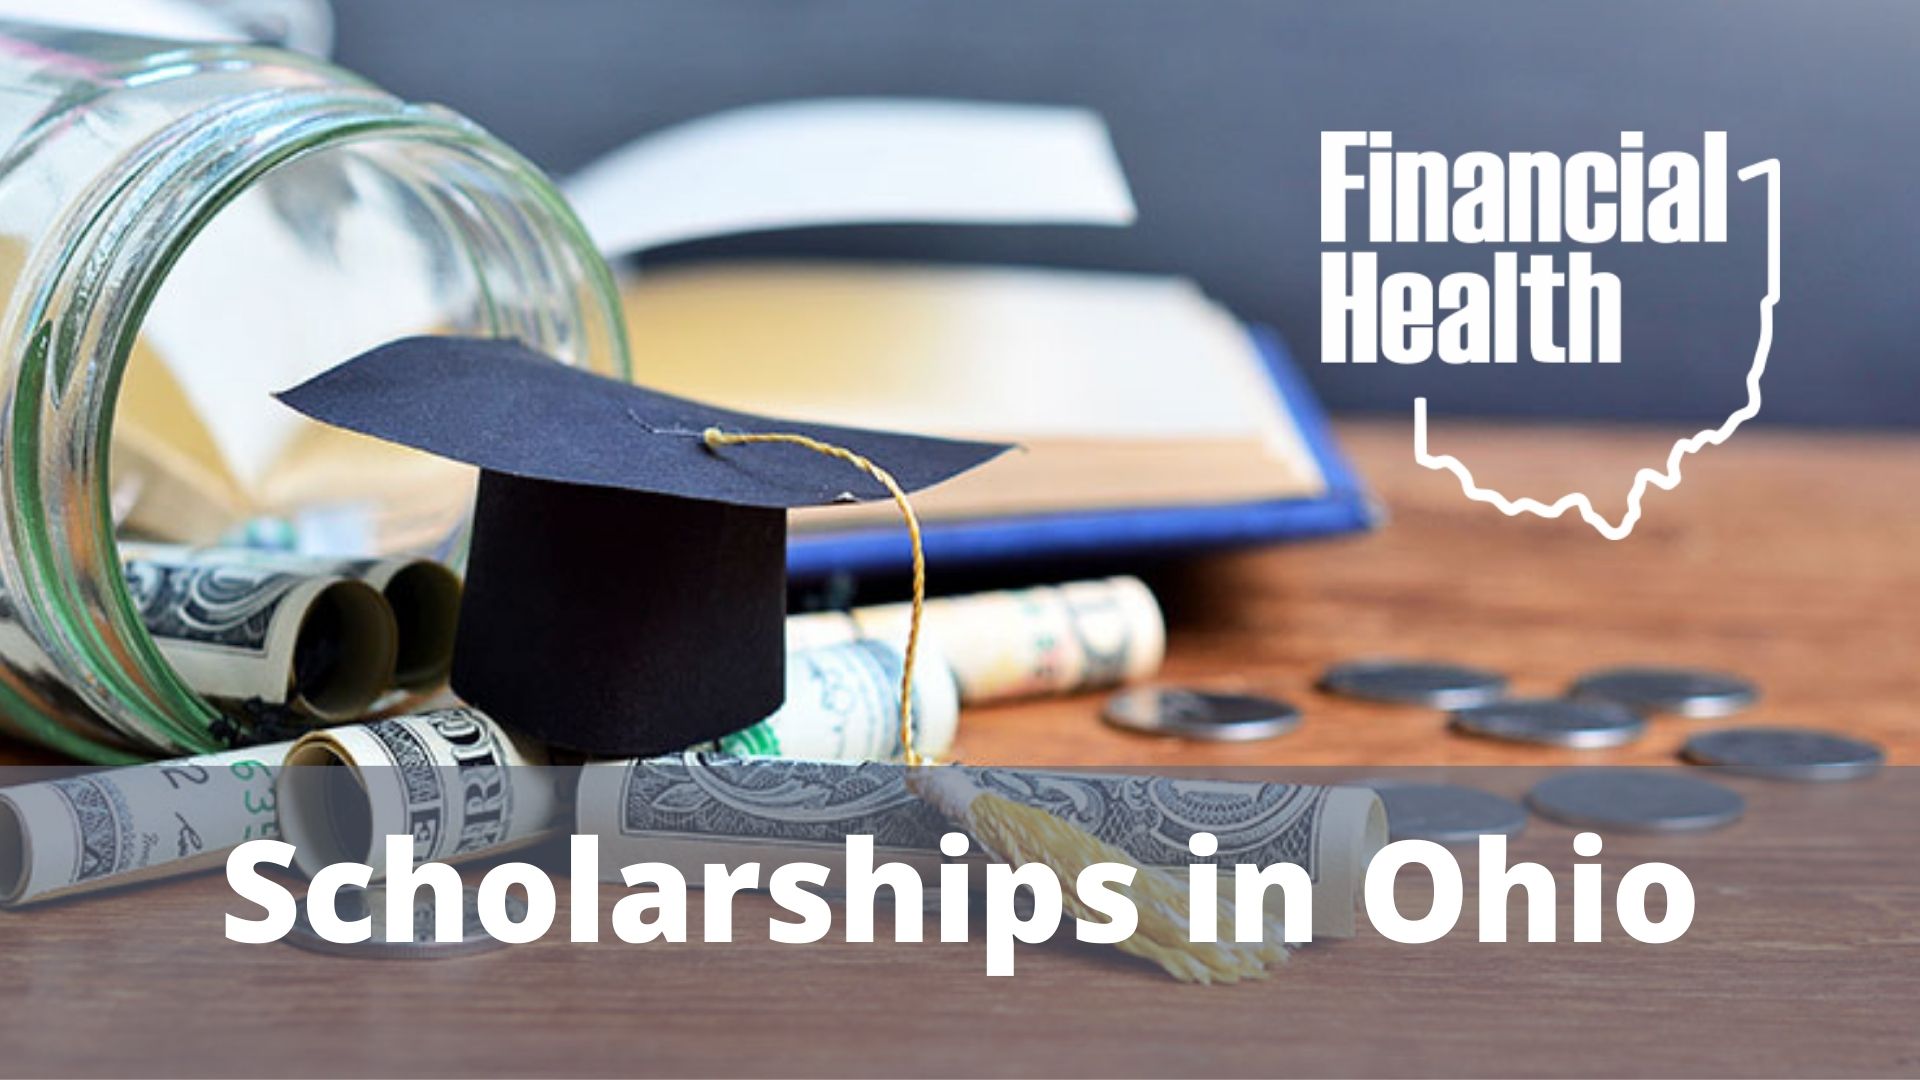 Scholarships in Ohio Financial Health of Ohio Residents